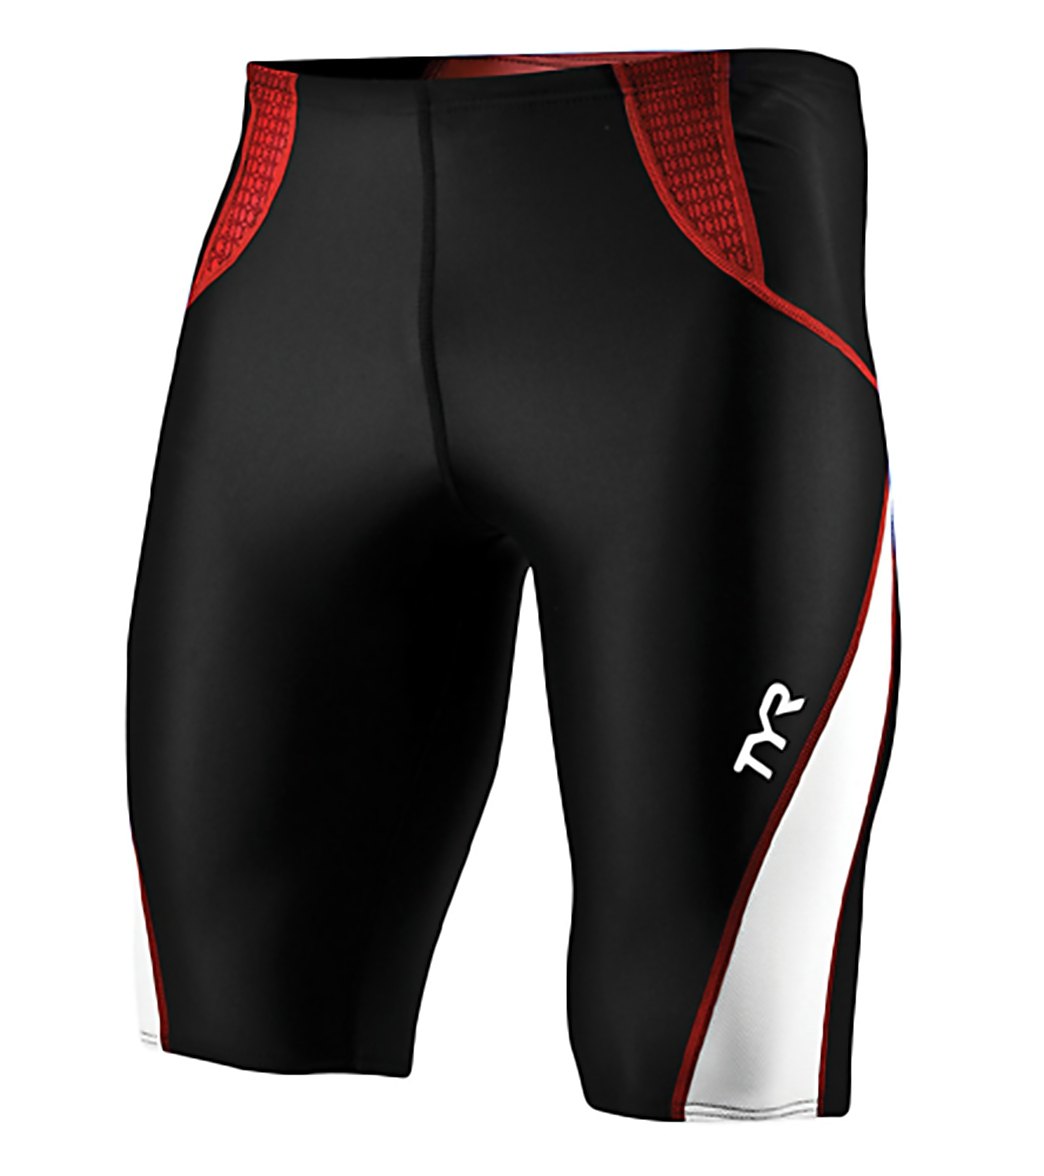 TYR Competitor Men's Swim Jammer at SwimOutlet.com